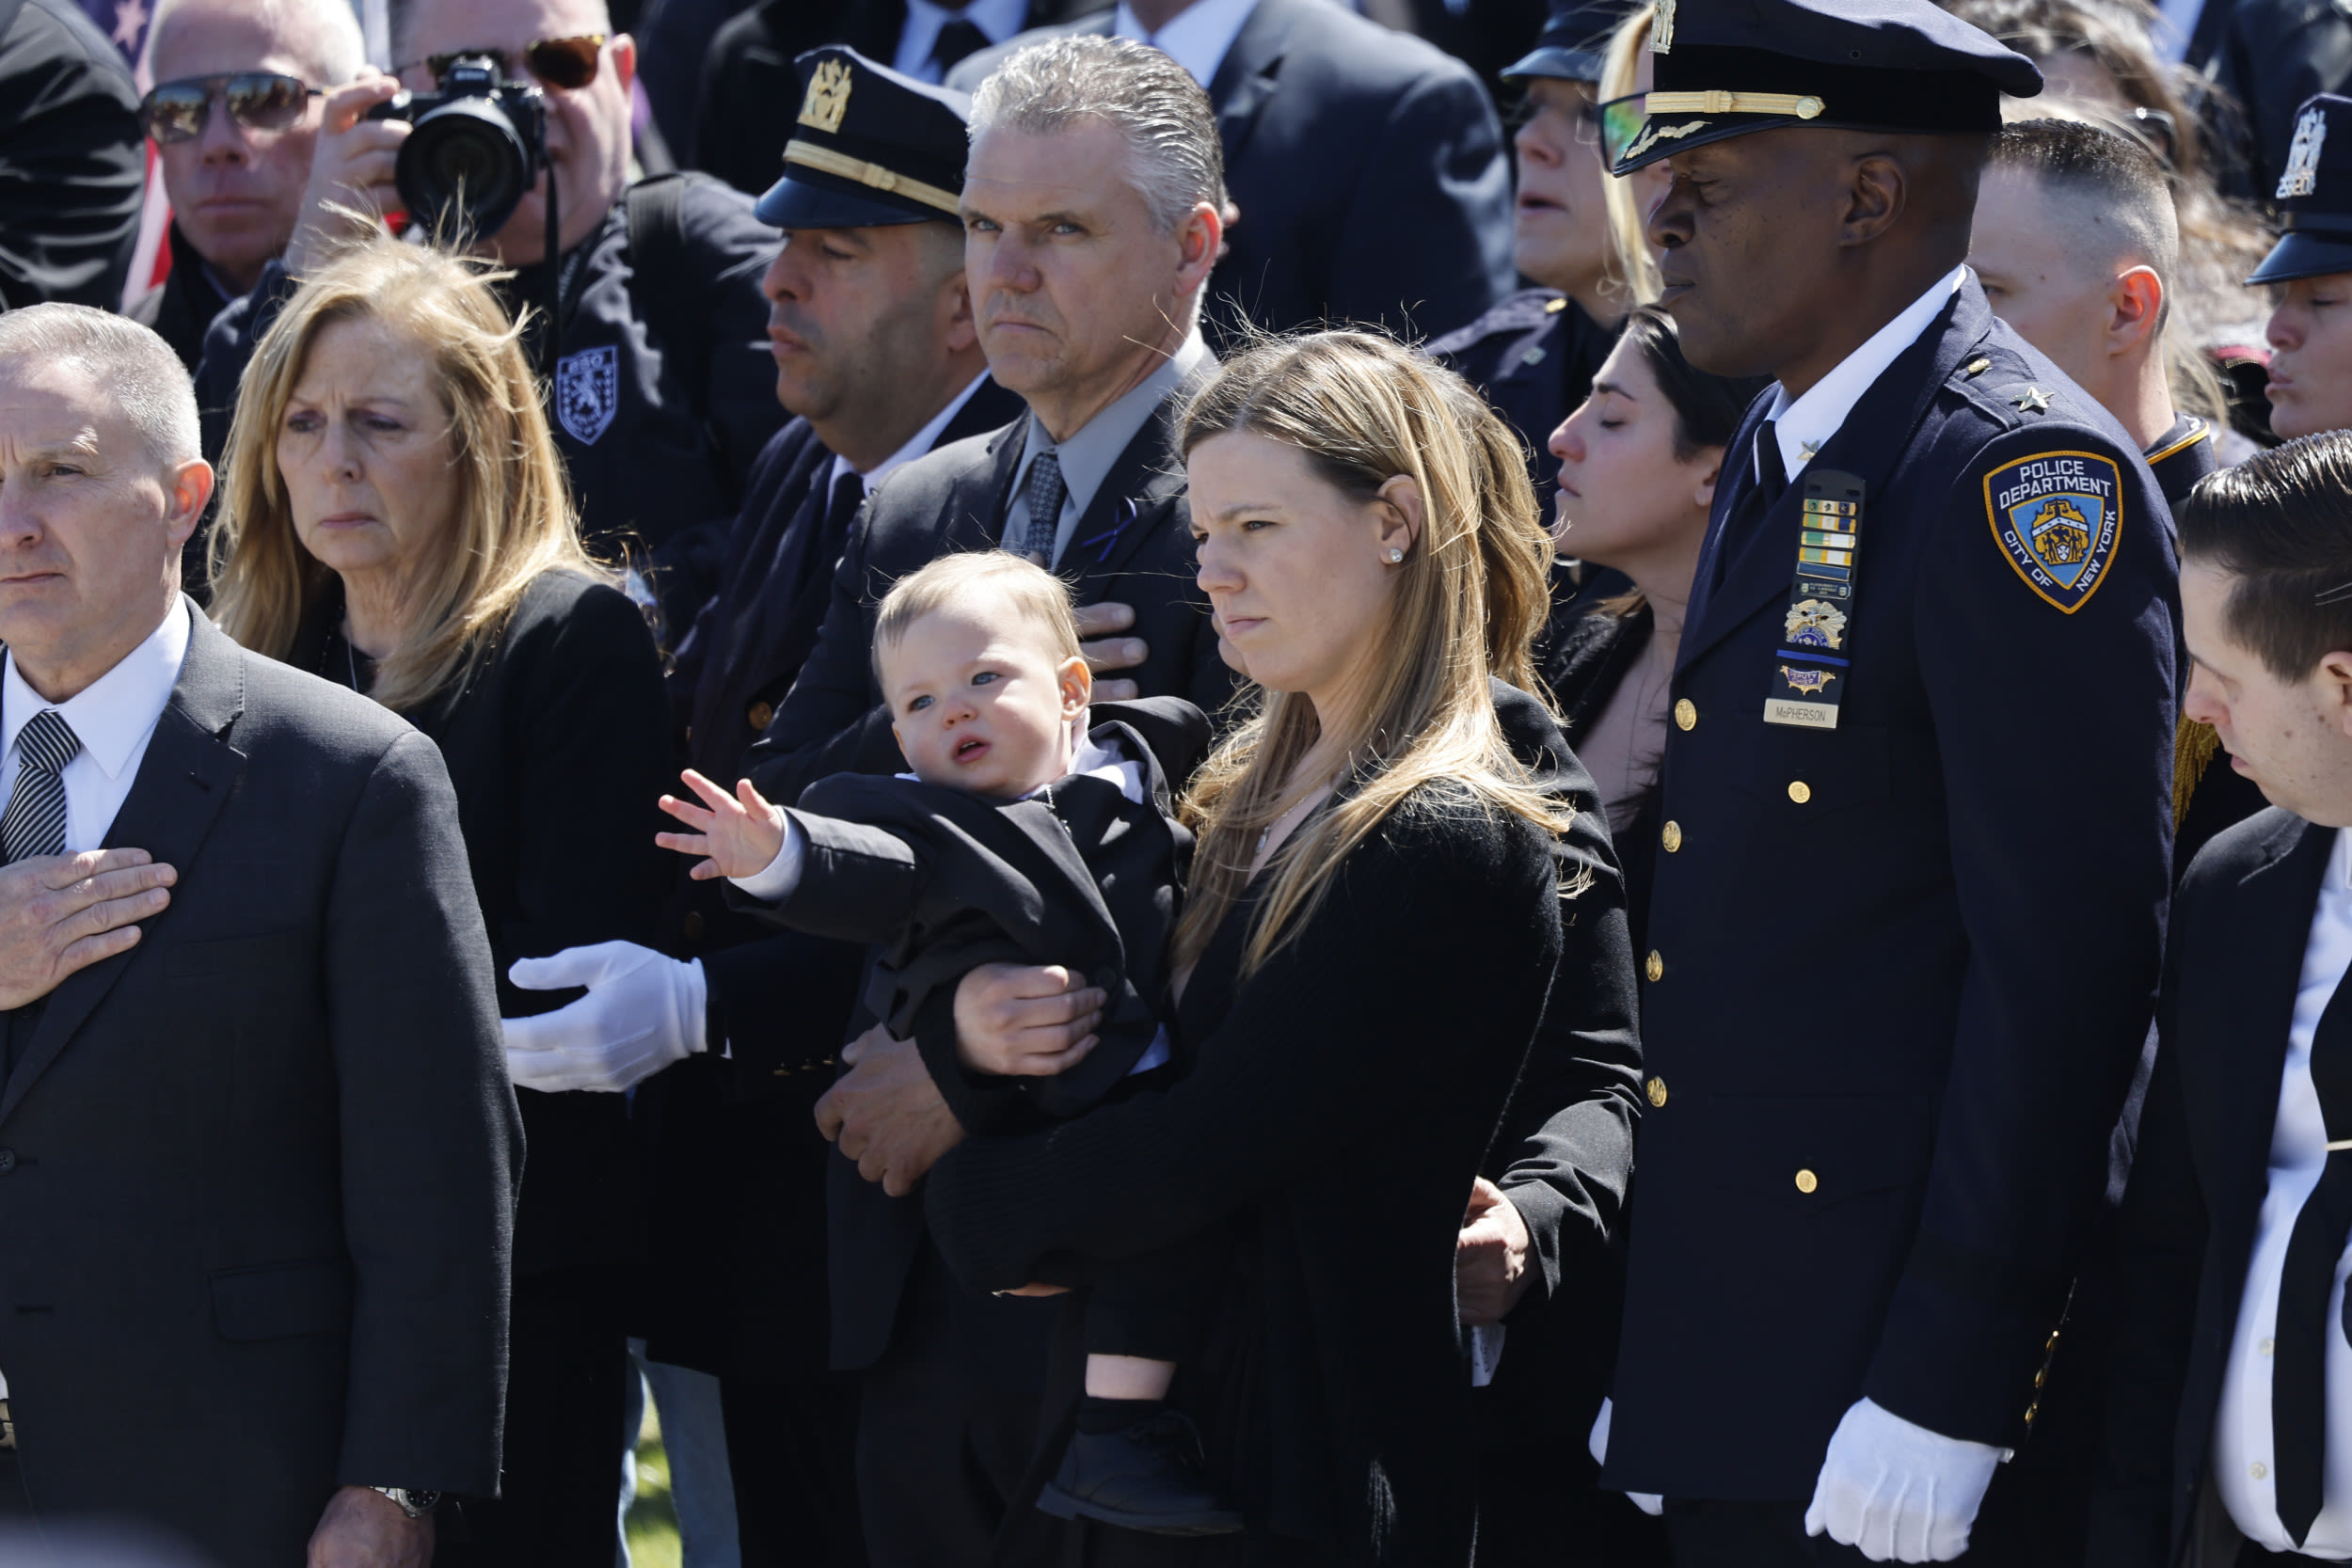 A fallen NYPD hero's life story, in his wife's own words